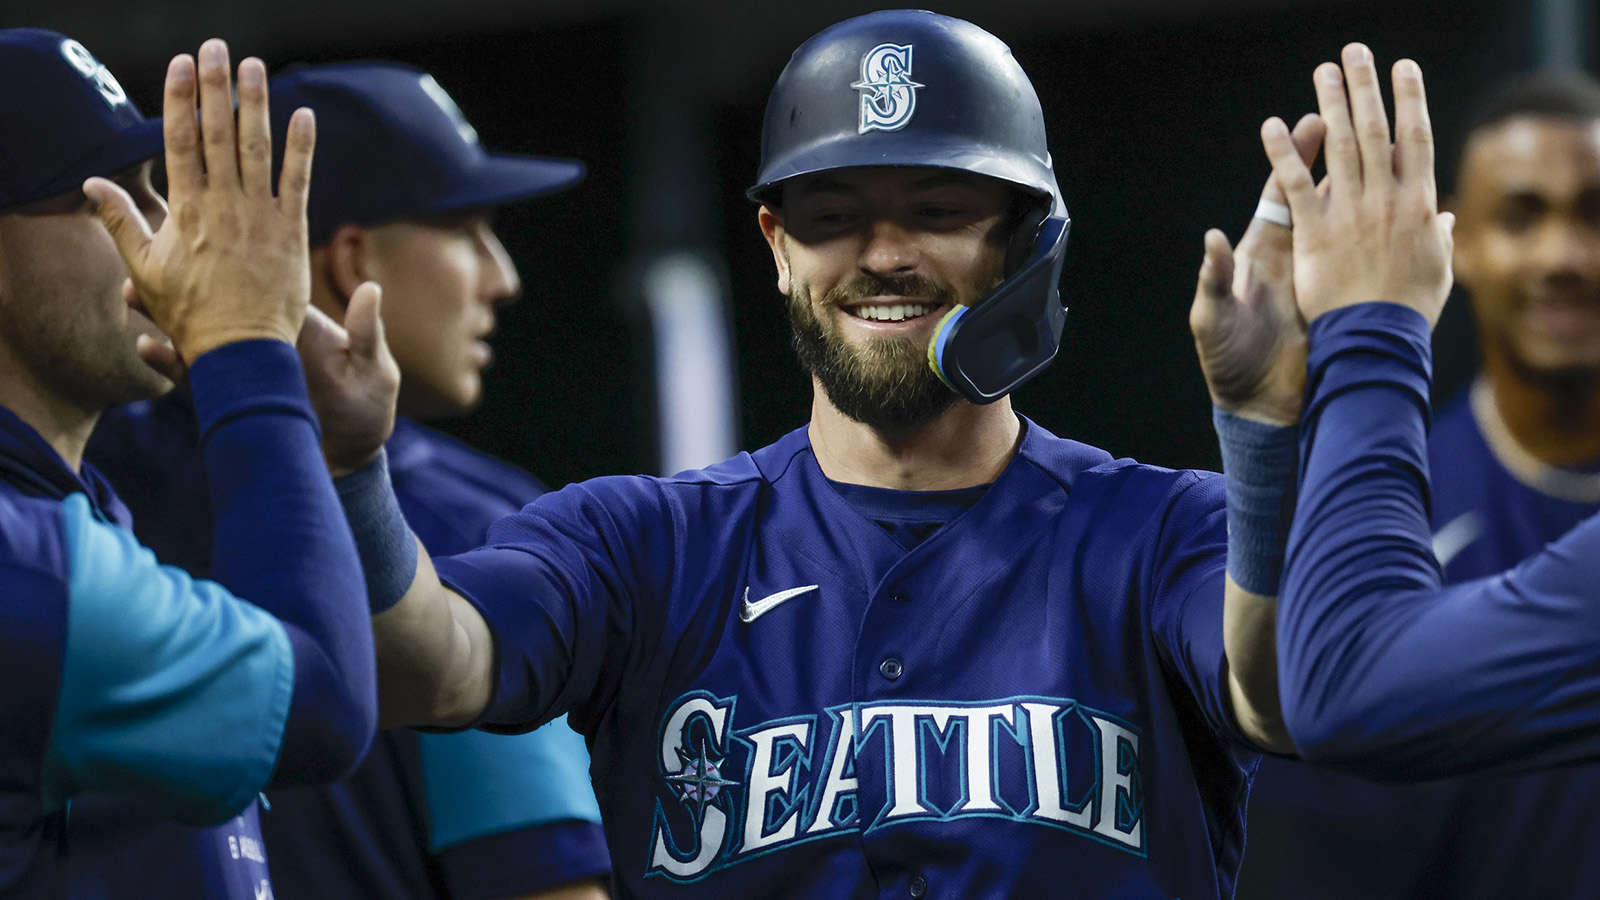 Seattle Mariners Drop Grey Unis for 2023, Navy Blue now Primary